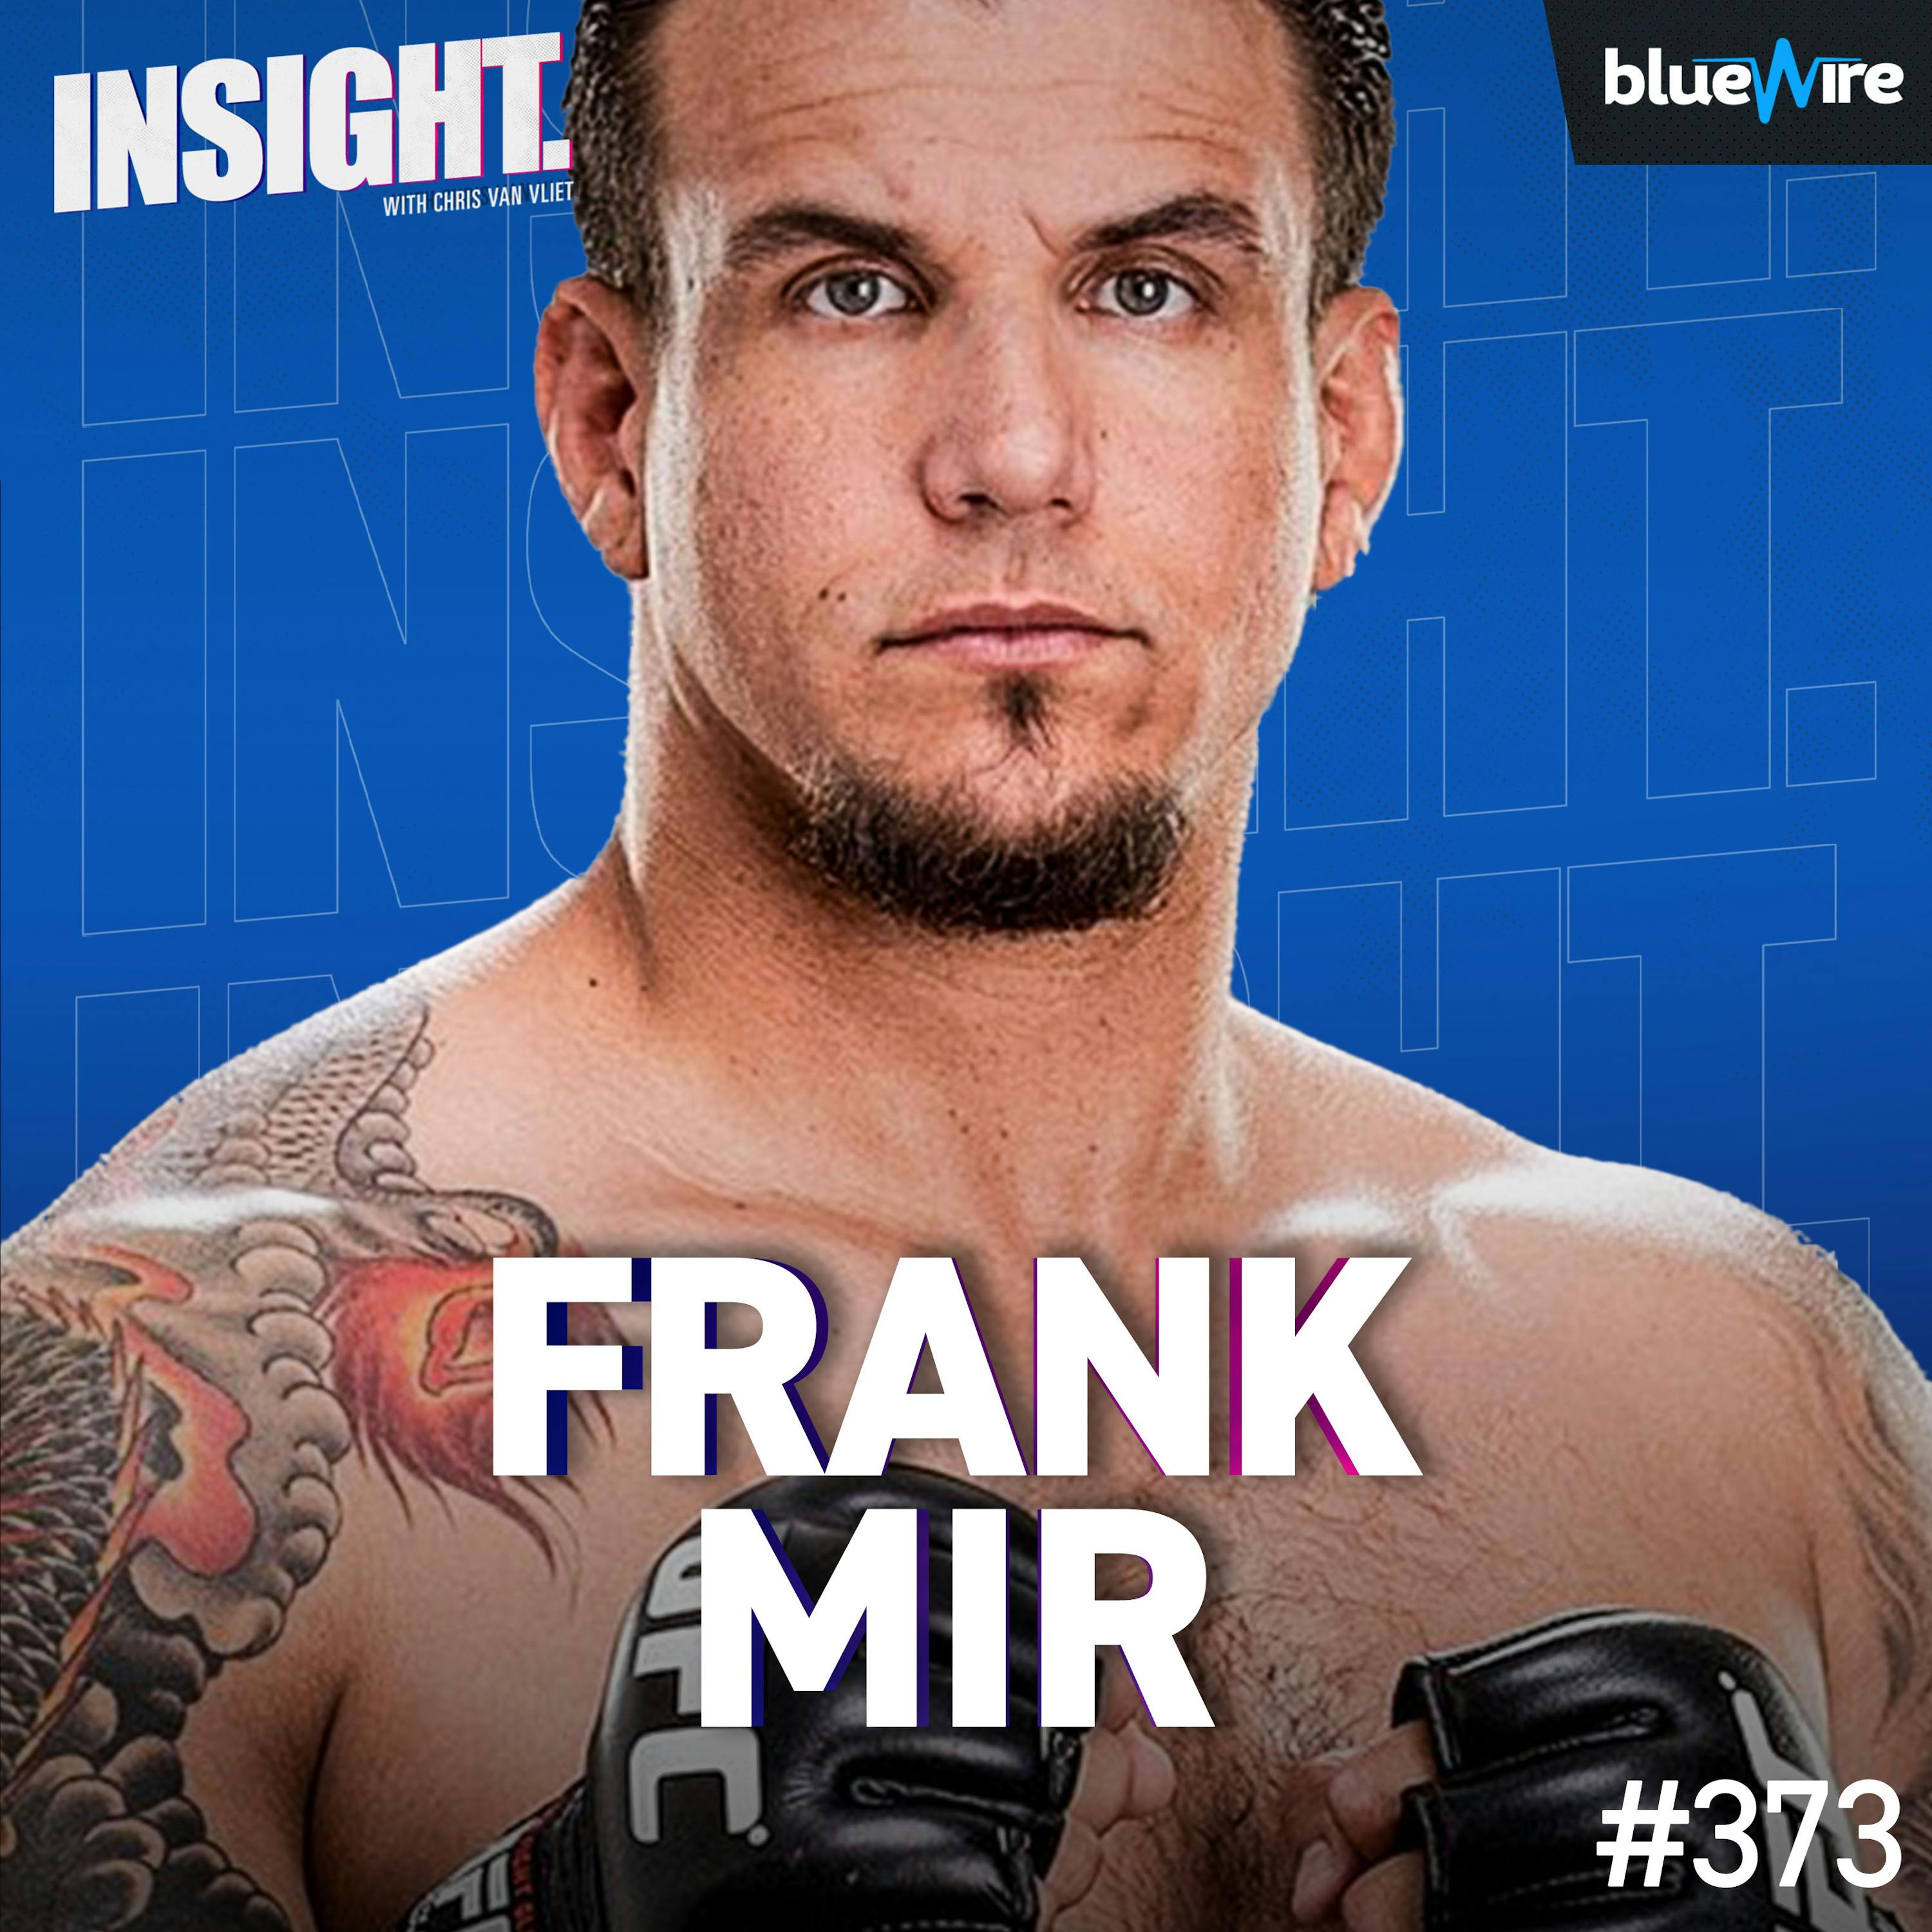 Frank Mir On Brock Lesnar, His Daughter Bella Mir's MMA Dominance, Why He's Not Ready To Retire